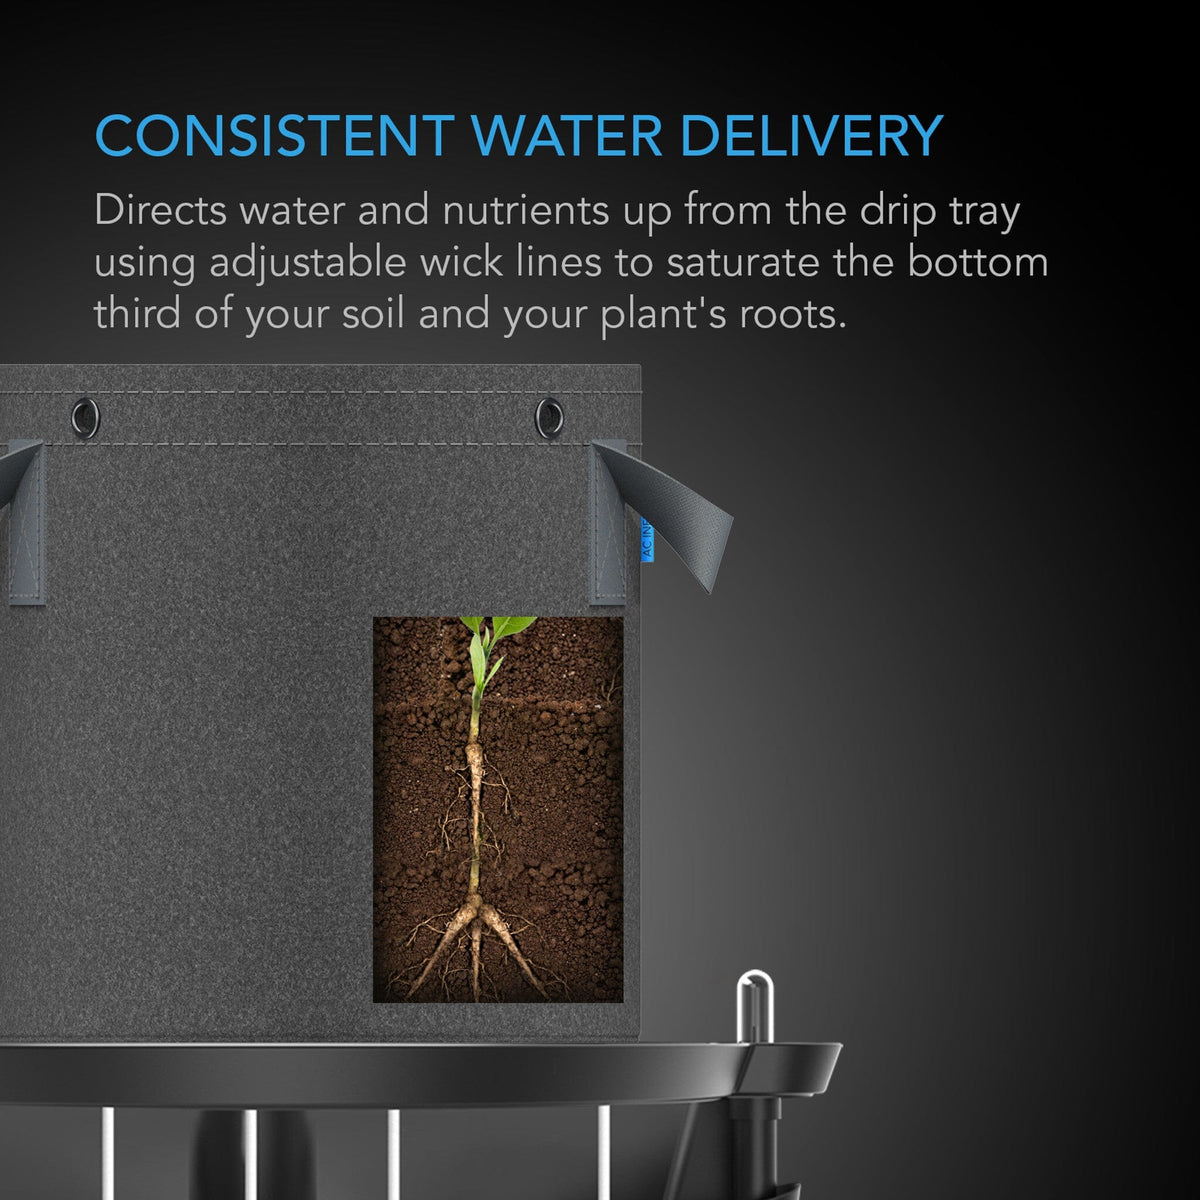 Consistent water delivery by AC Infinity